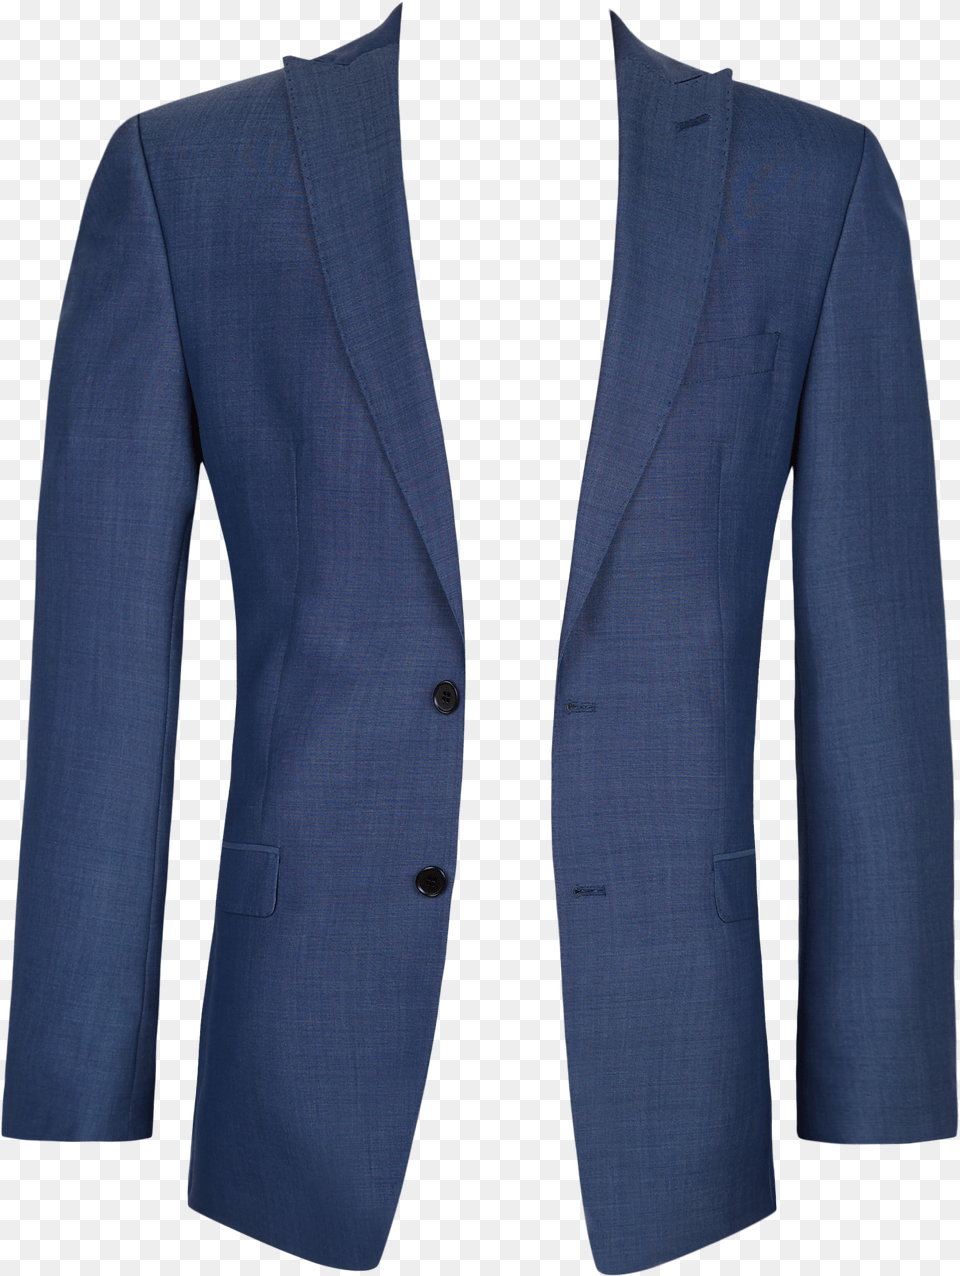 Ted Baker Faded Blue Lounge Suit Png Image